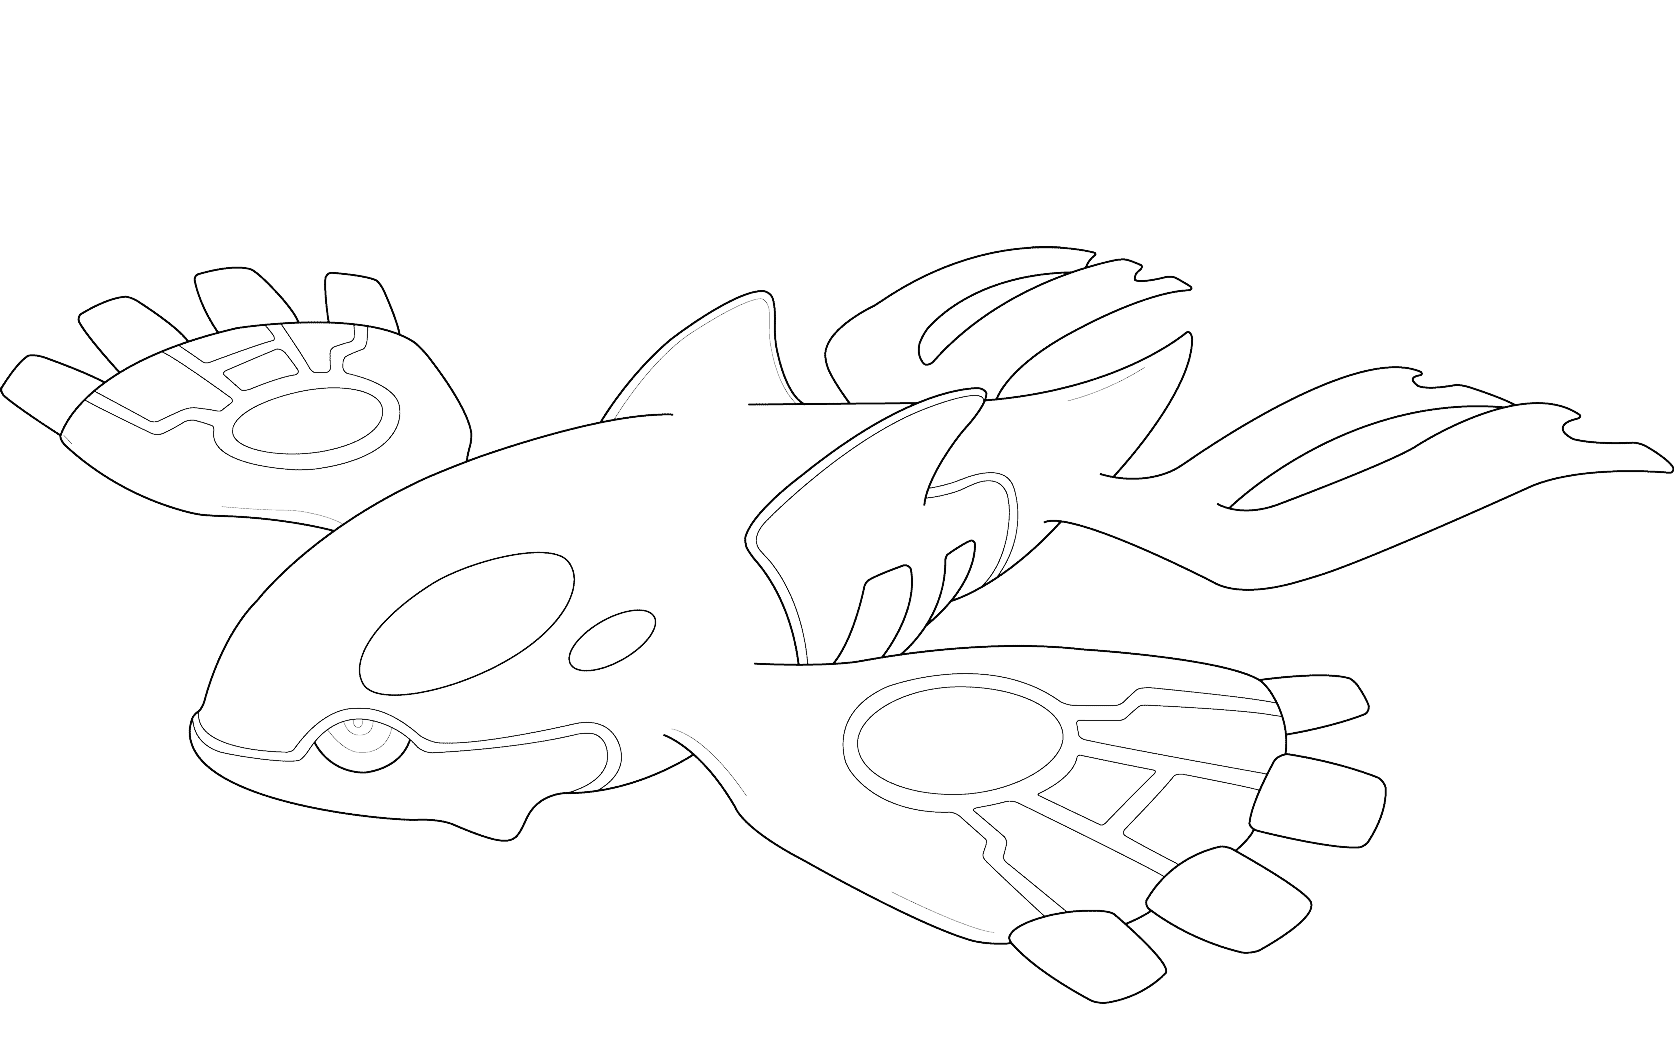 Kyogre Pokemon coloring page - ColouringPages